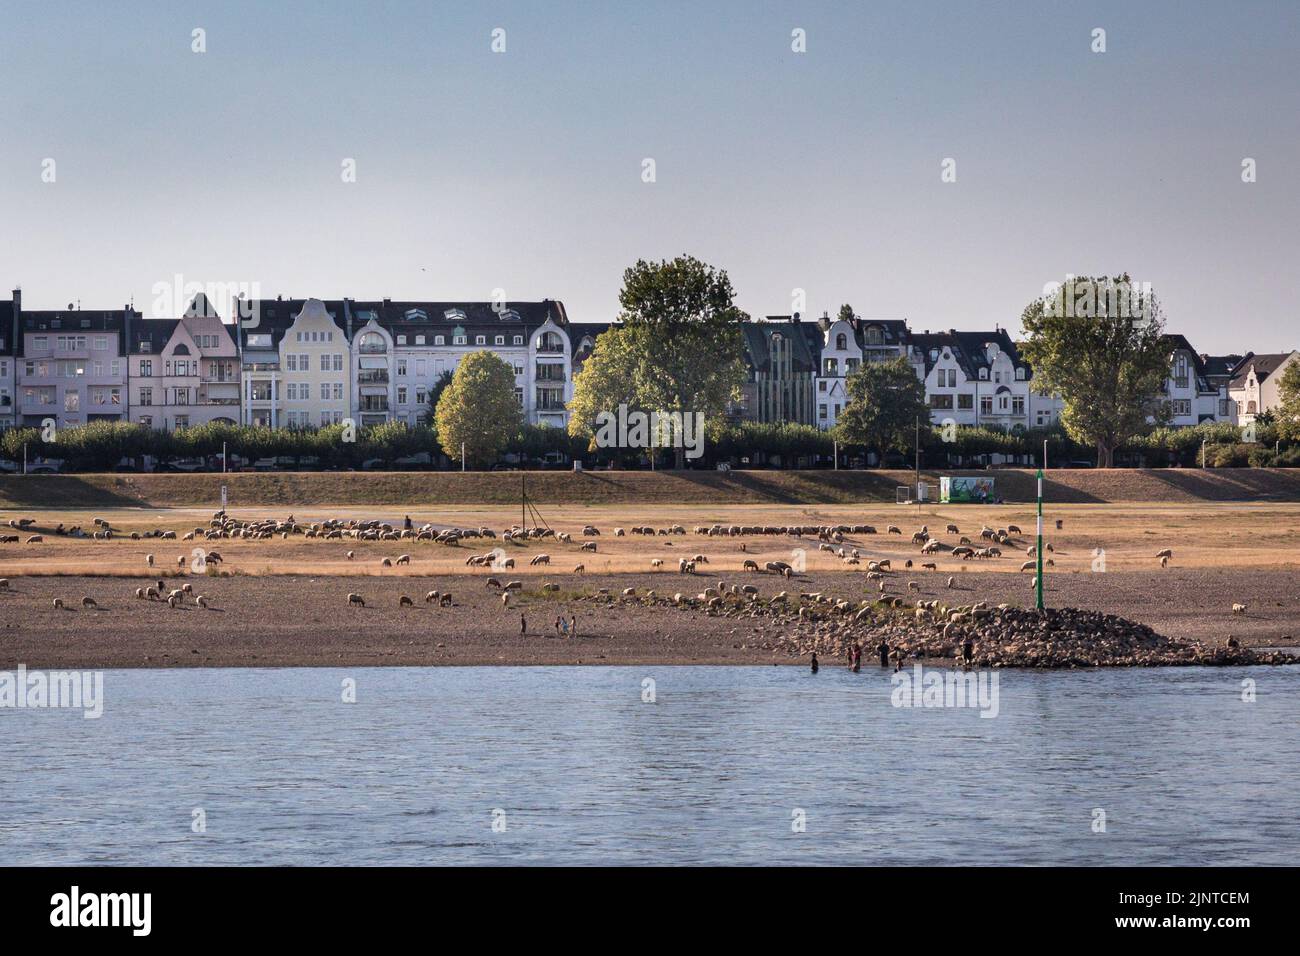 Düsseldorf, NRW, Germany. 13th Aug, 2022. A large herd of sheep is grazing on the parched riverbank. The River Rhine, one of the busiest inland waterways in the world, has been strongly affected by the ongoing drought and resulting low water levels, caused by prolonged heat of up to 40 degrees and very little rain in the last few weeks. The shipping lane has narrowed down considerably, slowing down traffic, most vessels have also had to considerably reduce their freight weight, leading to supply issues and higher shipping prices. Credit: Imageplotter/Alamy Live News Stock Photo